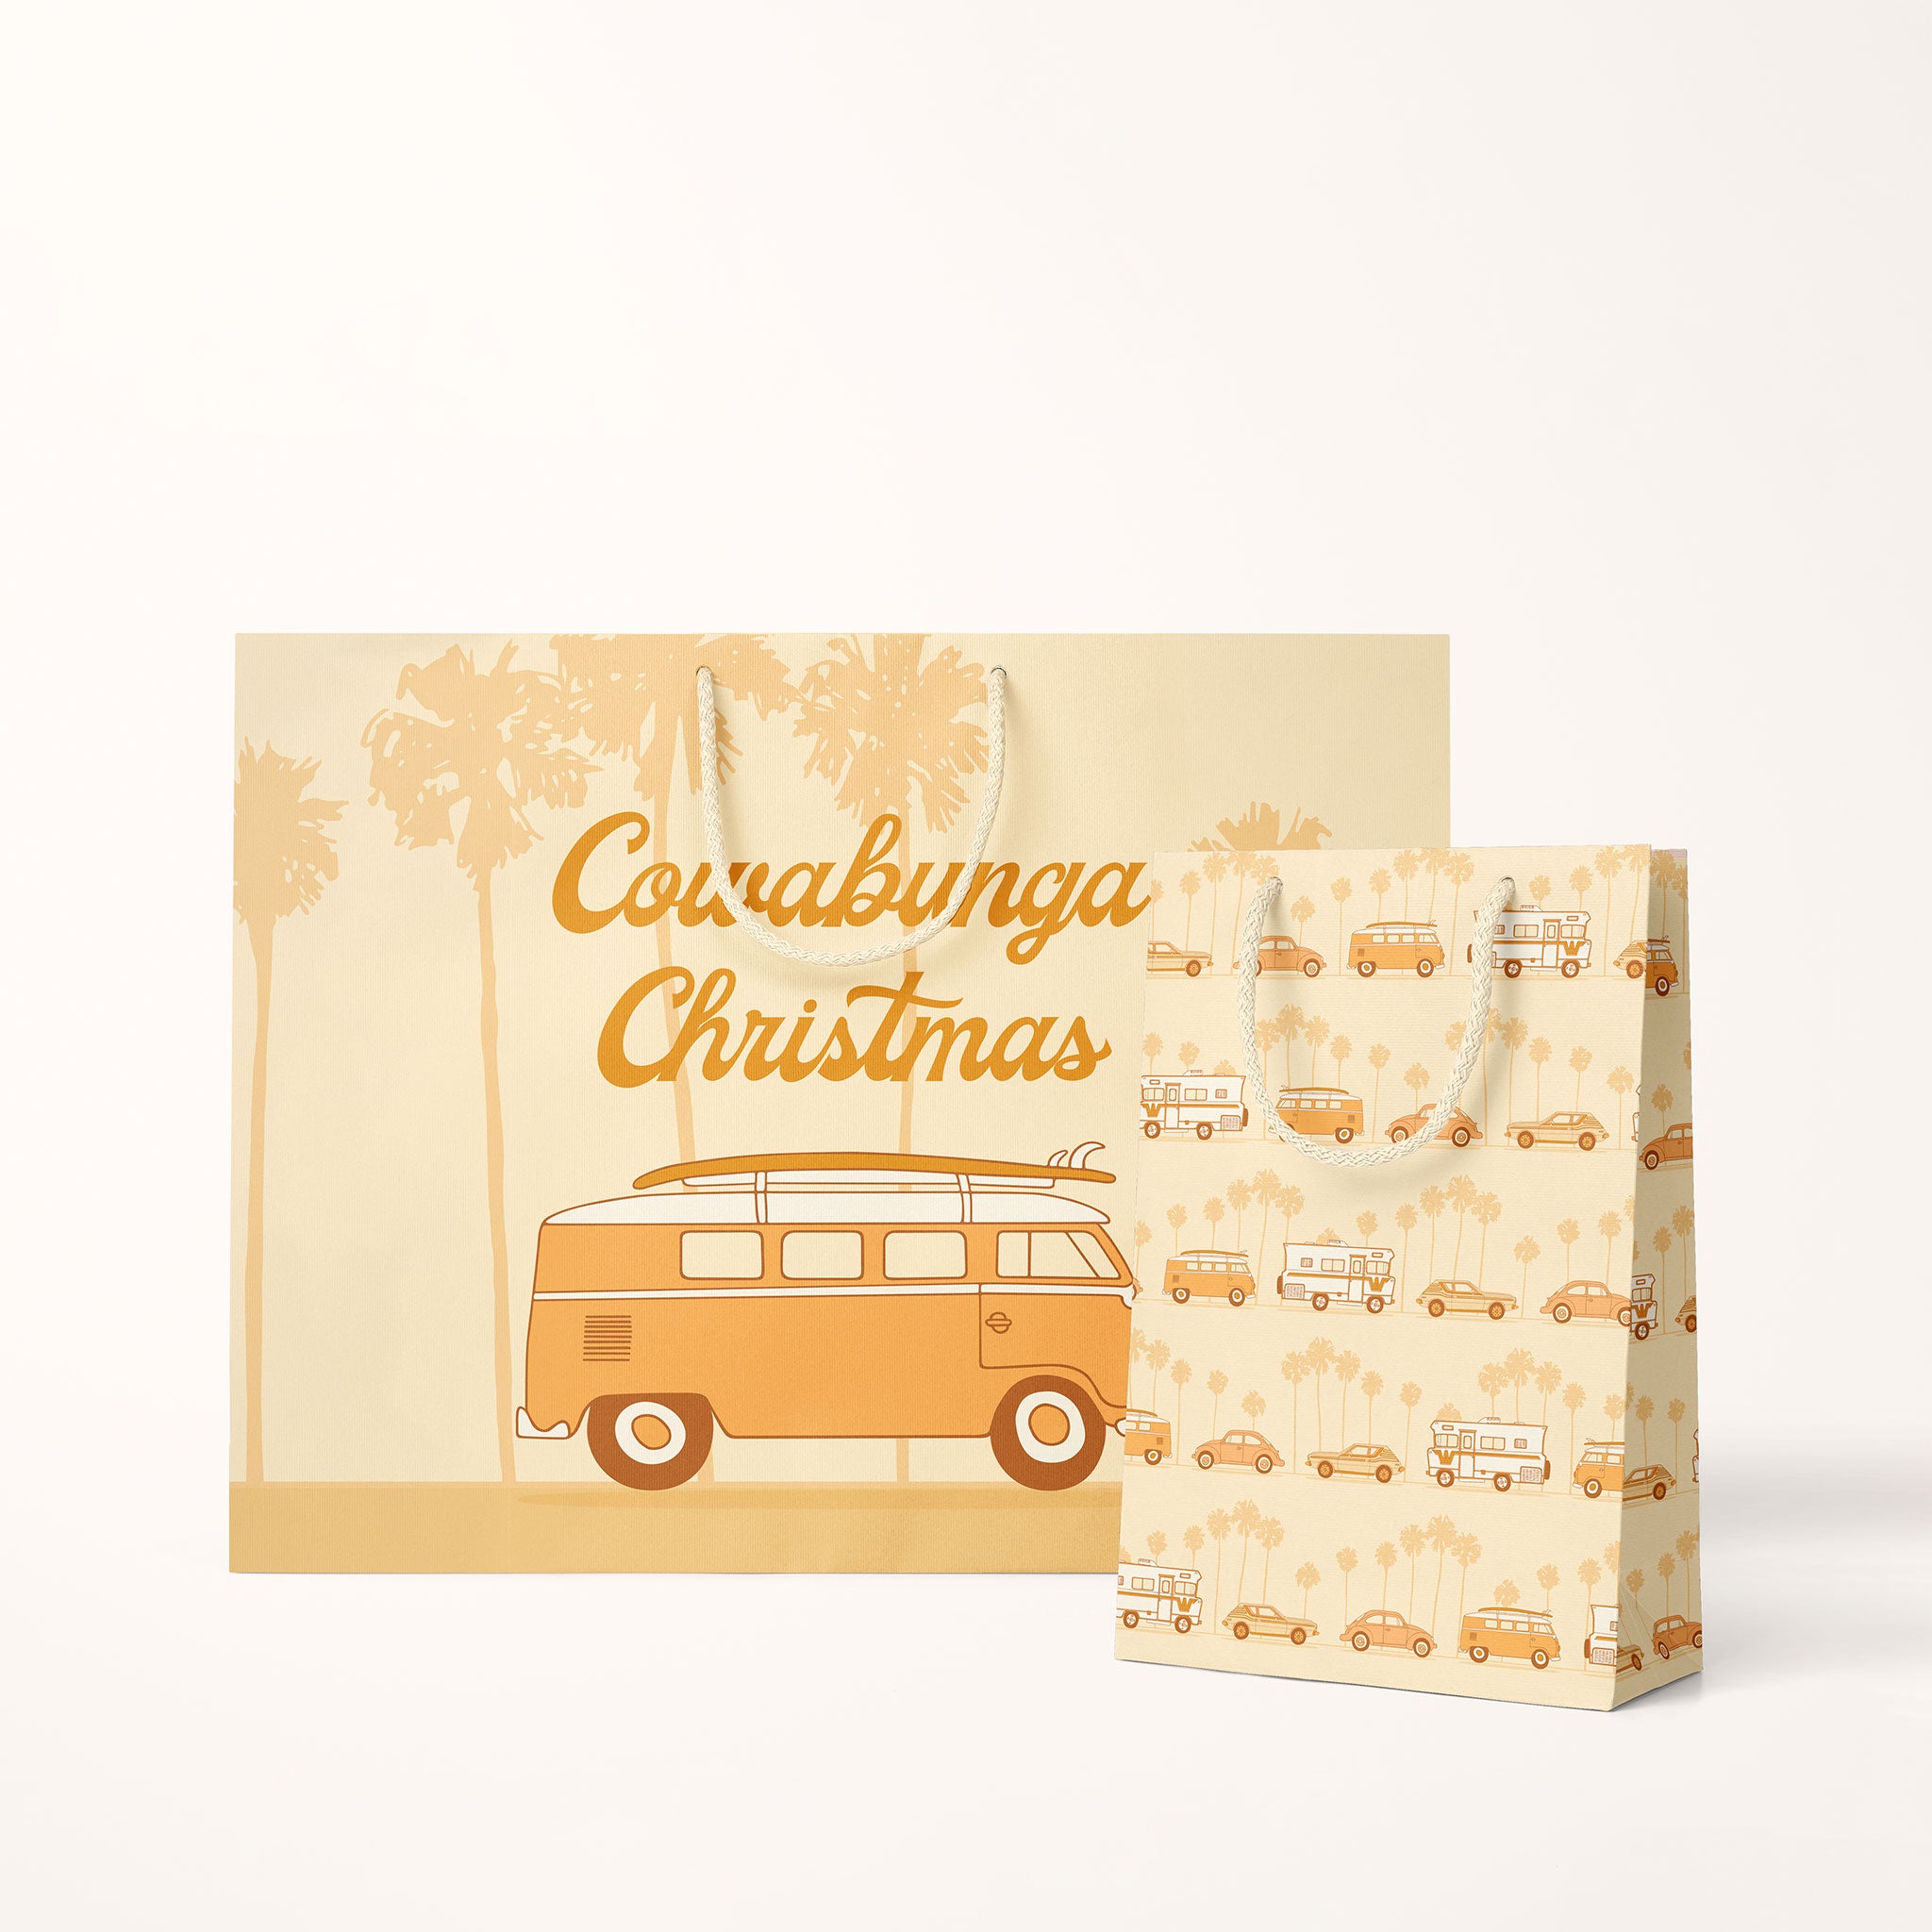 On a white background is a light orange gift bag with a VW bus graphic and rope details along with text that reads, &quot;Cowabunga Christmas&quot;.